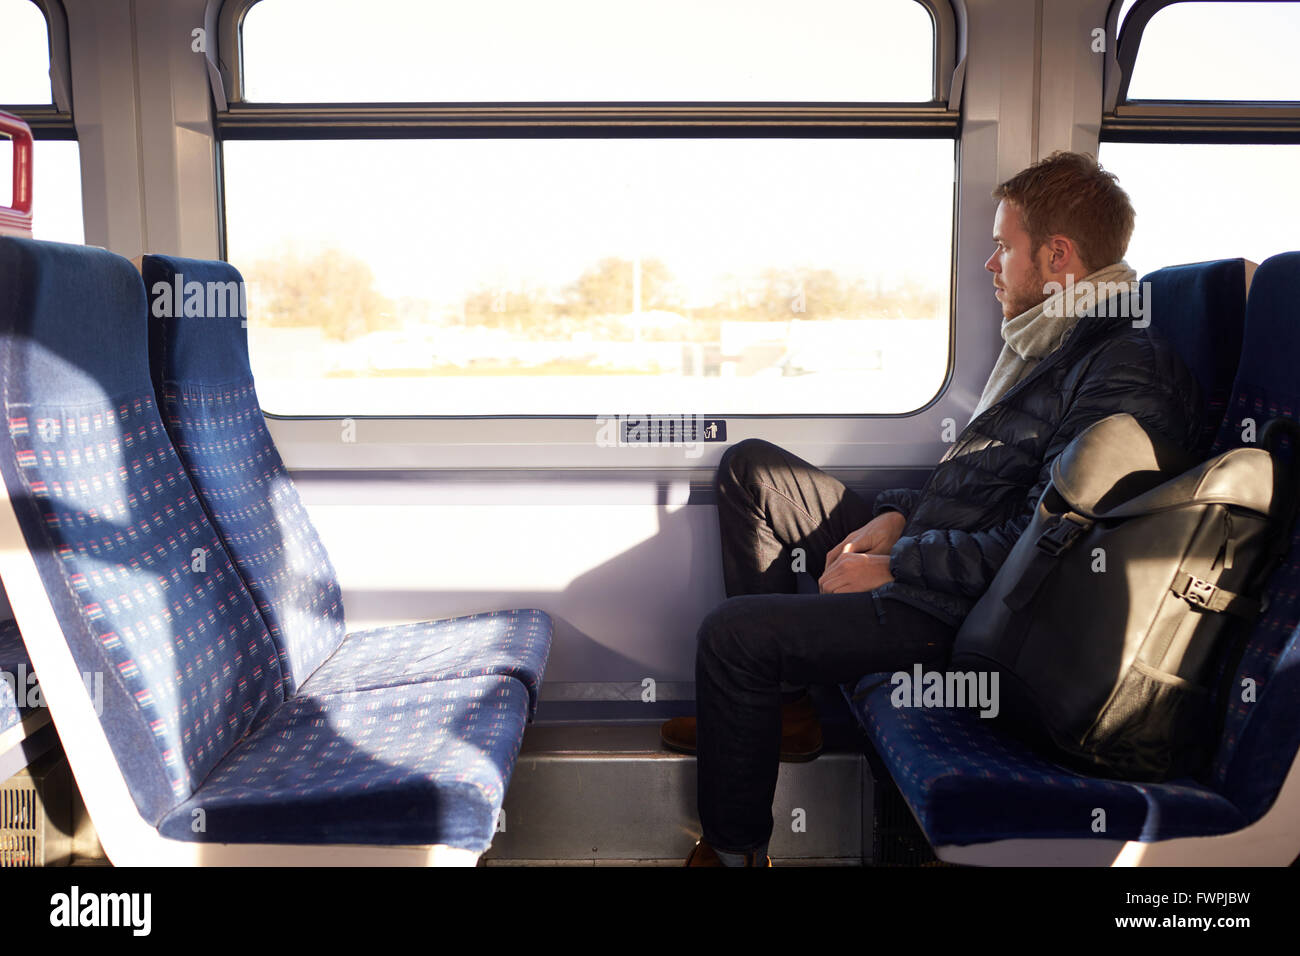 Young Man Sitting In Train Carriage On Railway Journey Stock Photo